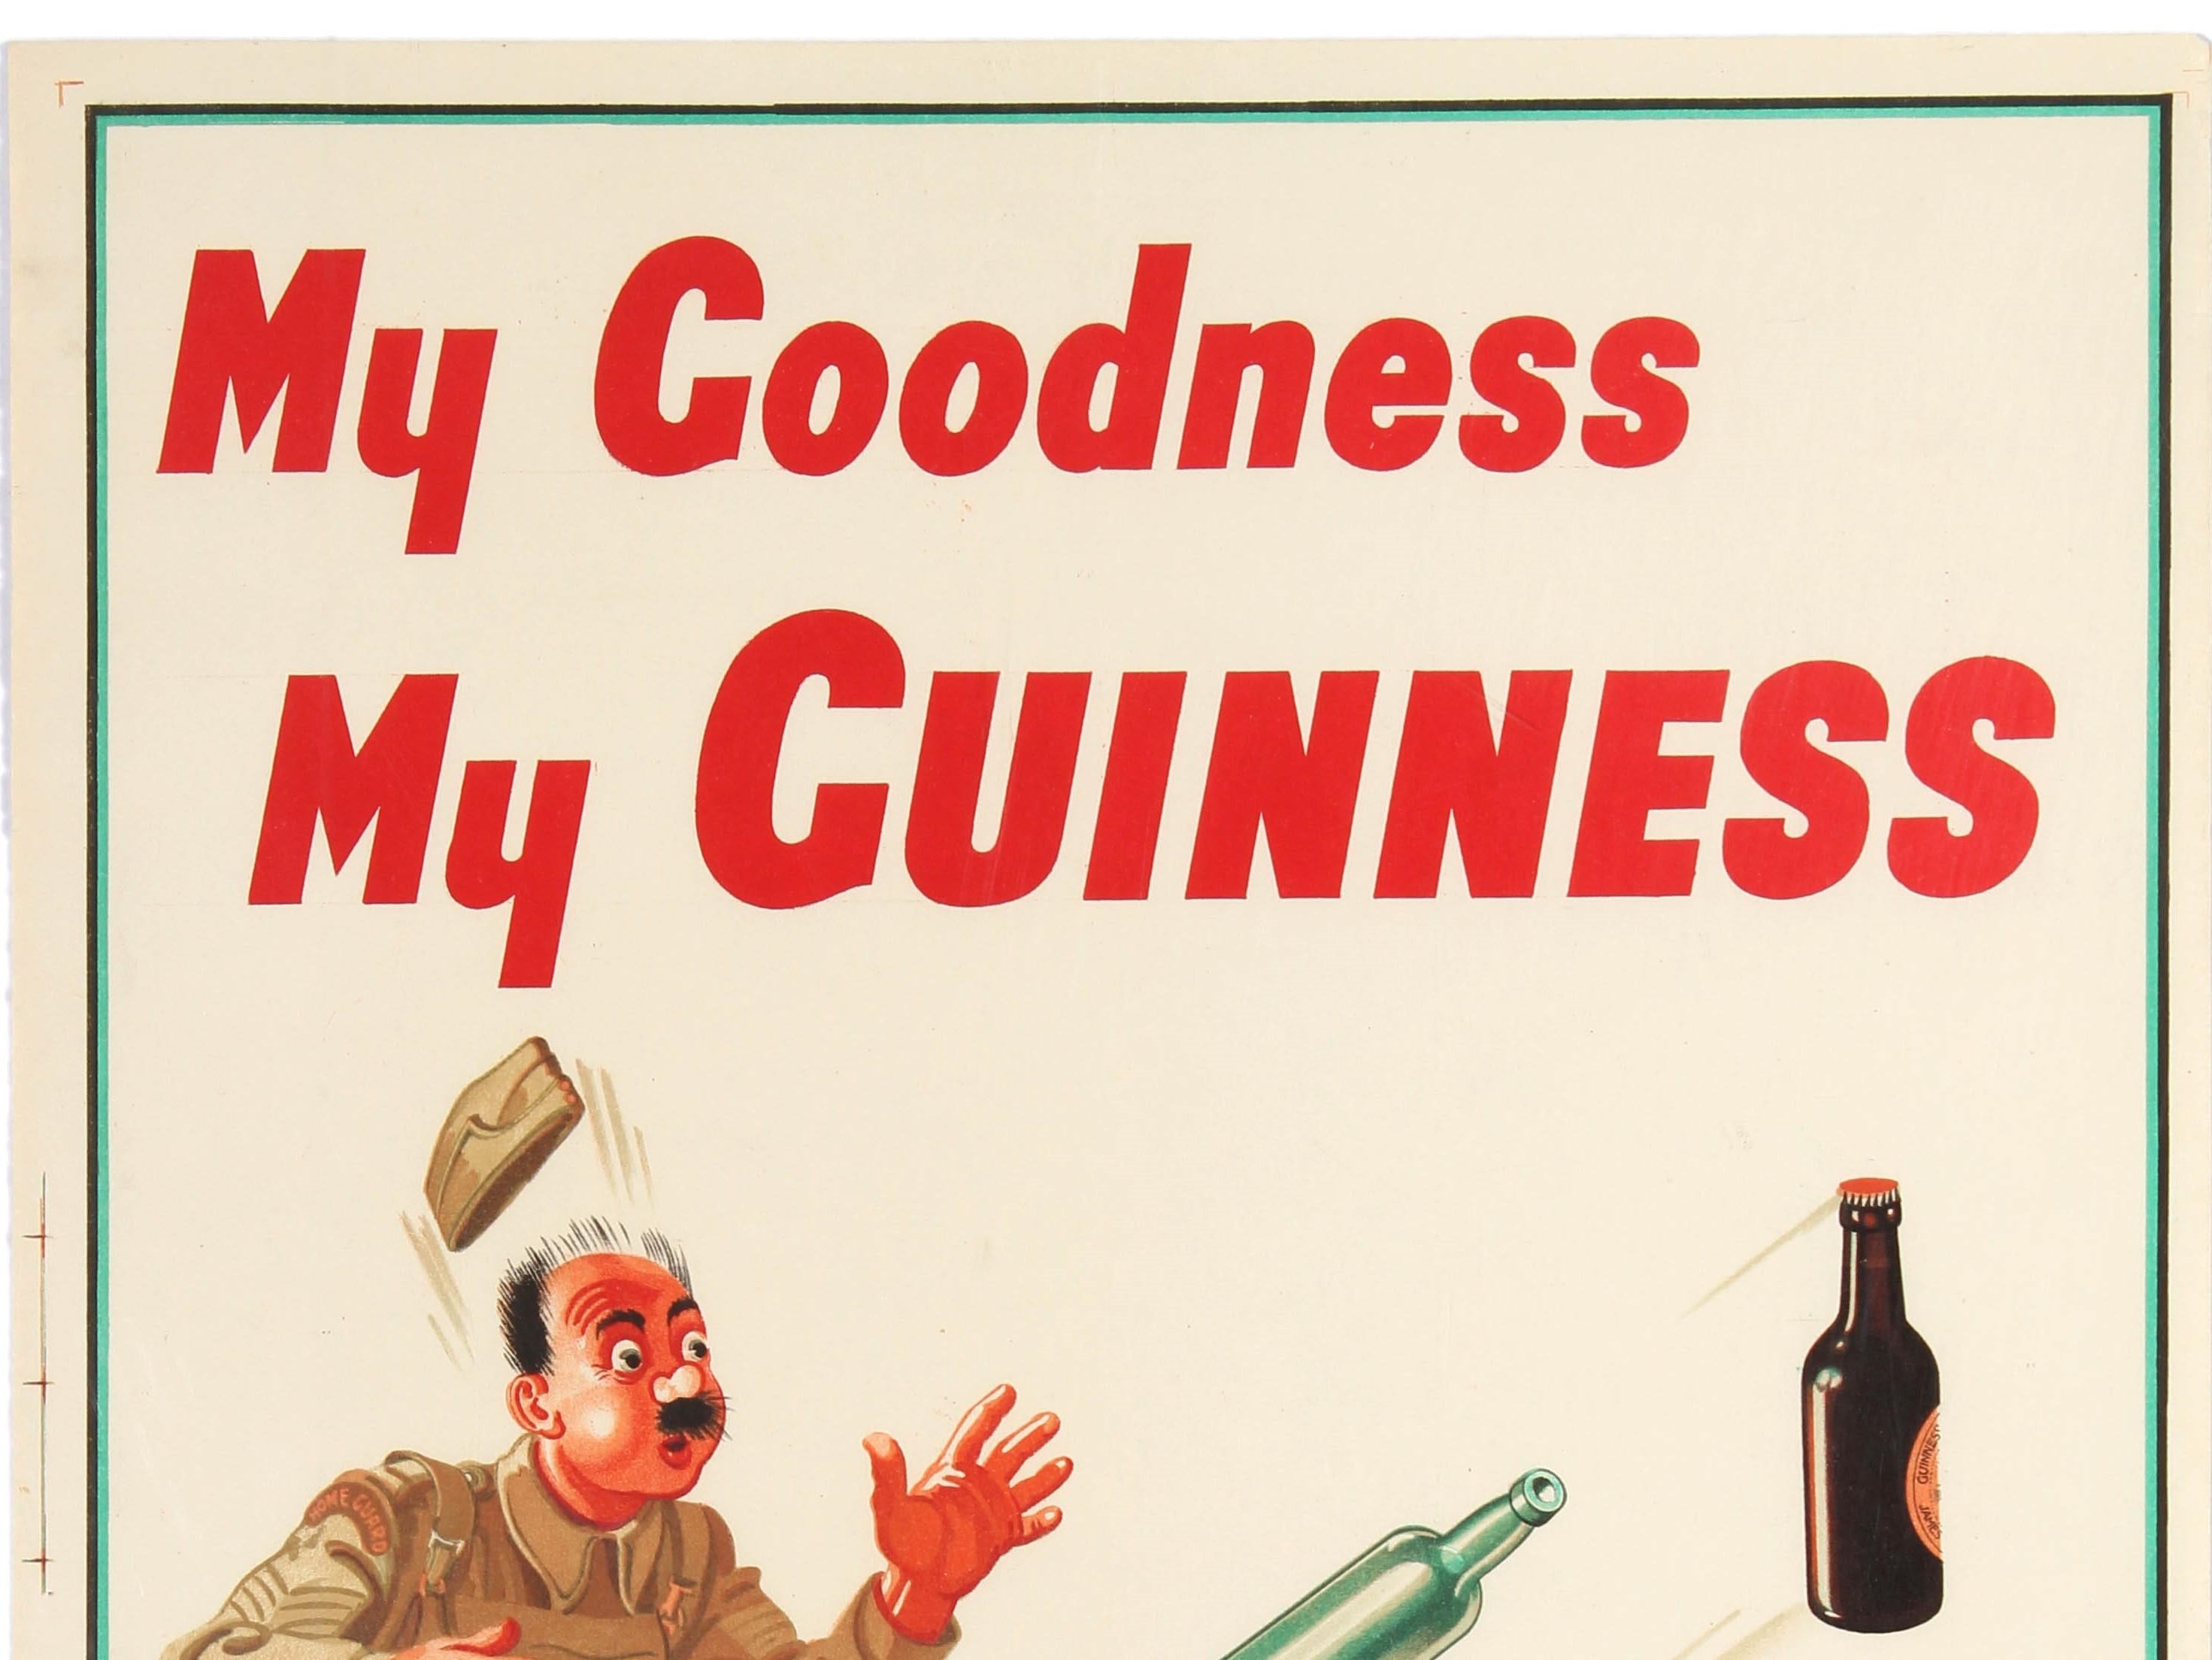 Rare original vintage World War Two related Guinness advertising poster – My Goodness My Guinness – featuring a great design by the notable artist John Gilroy (John Thomas Young Gilroy; 1898-1985) of a soldier jumping up in shock at the sight of